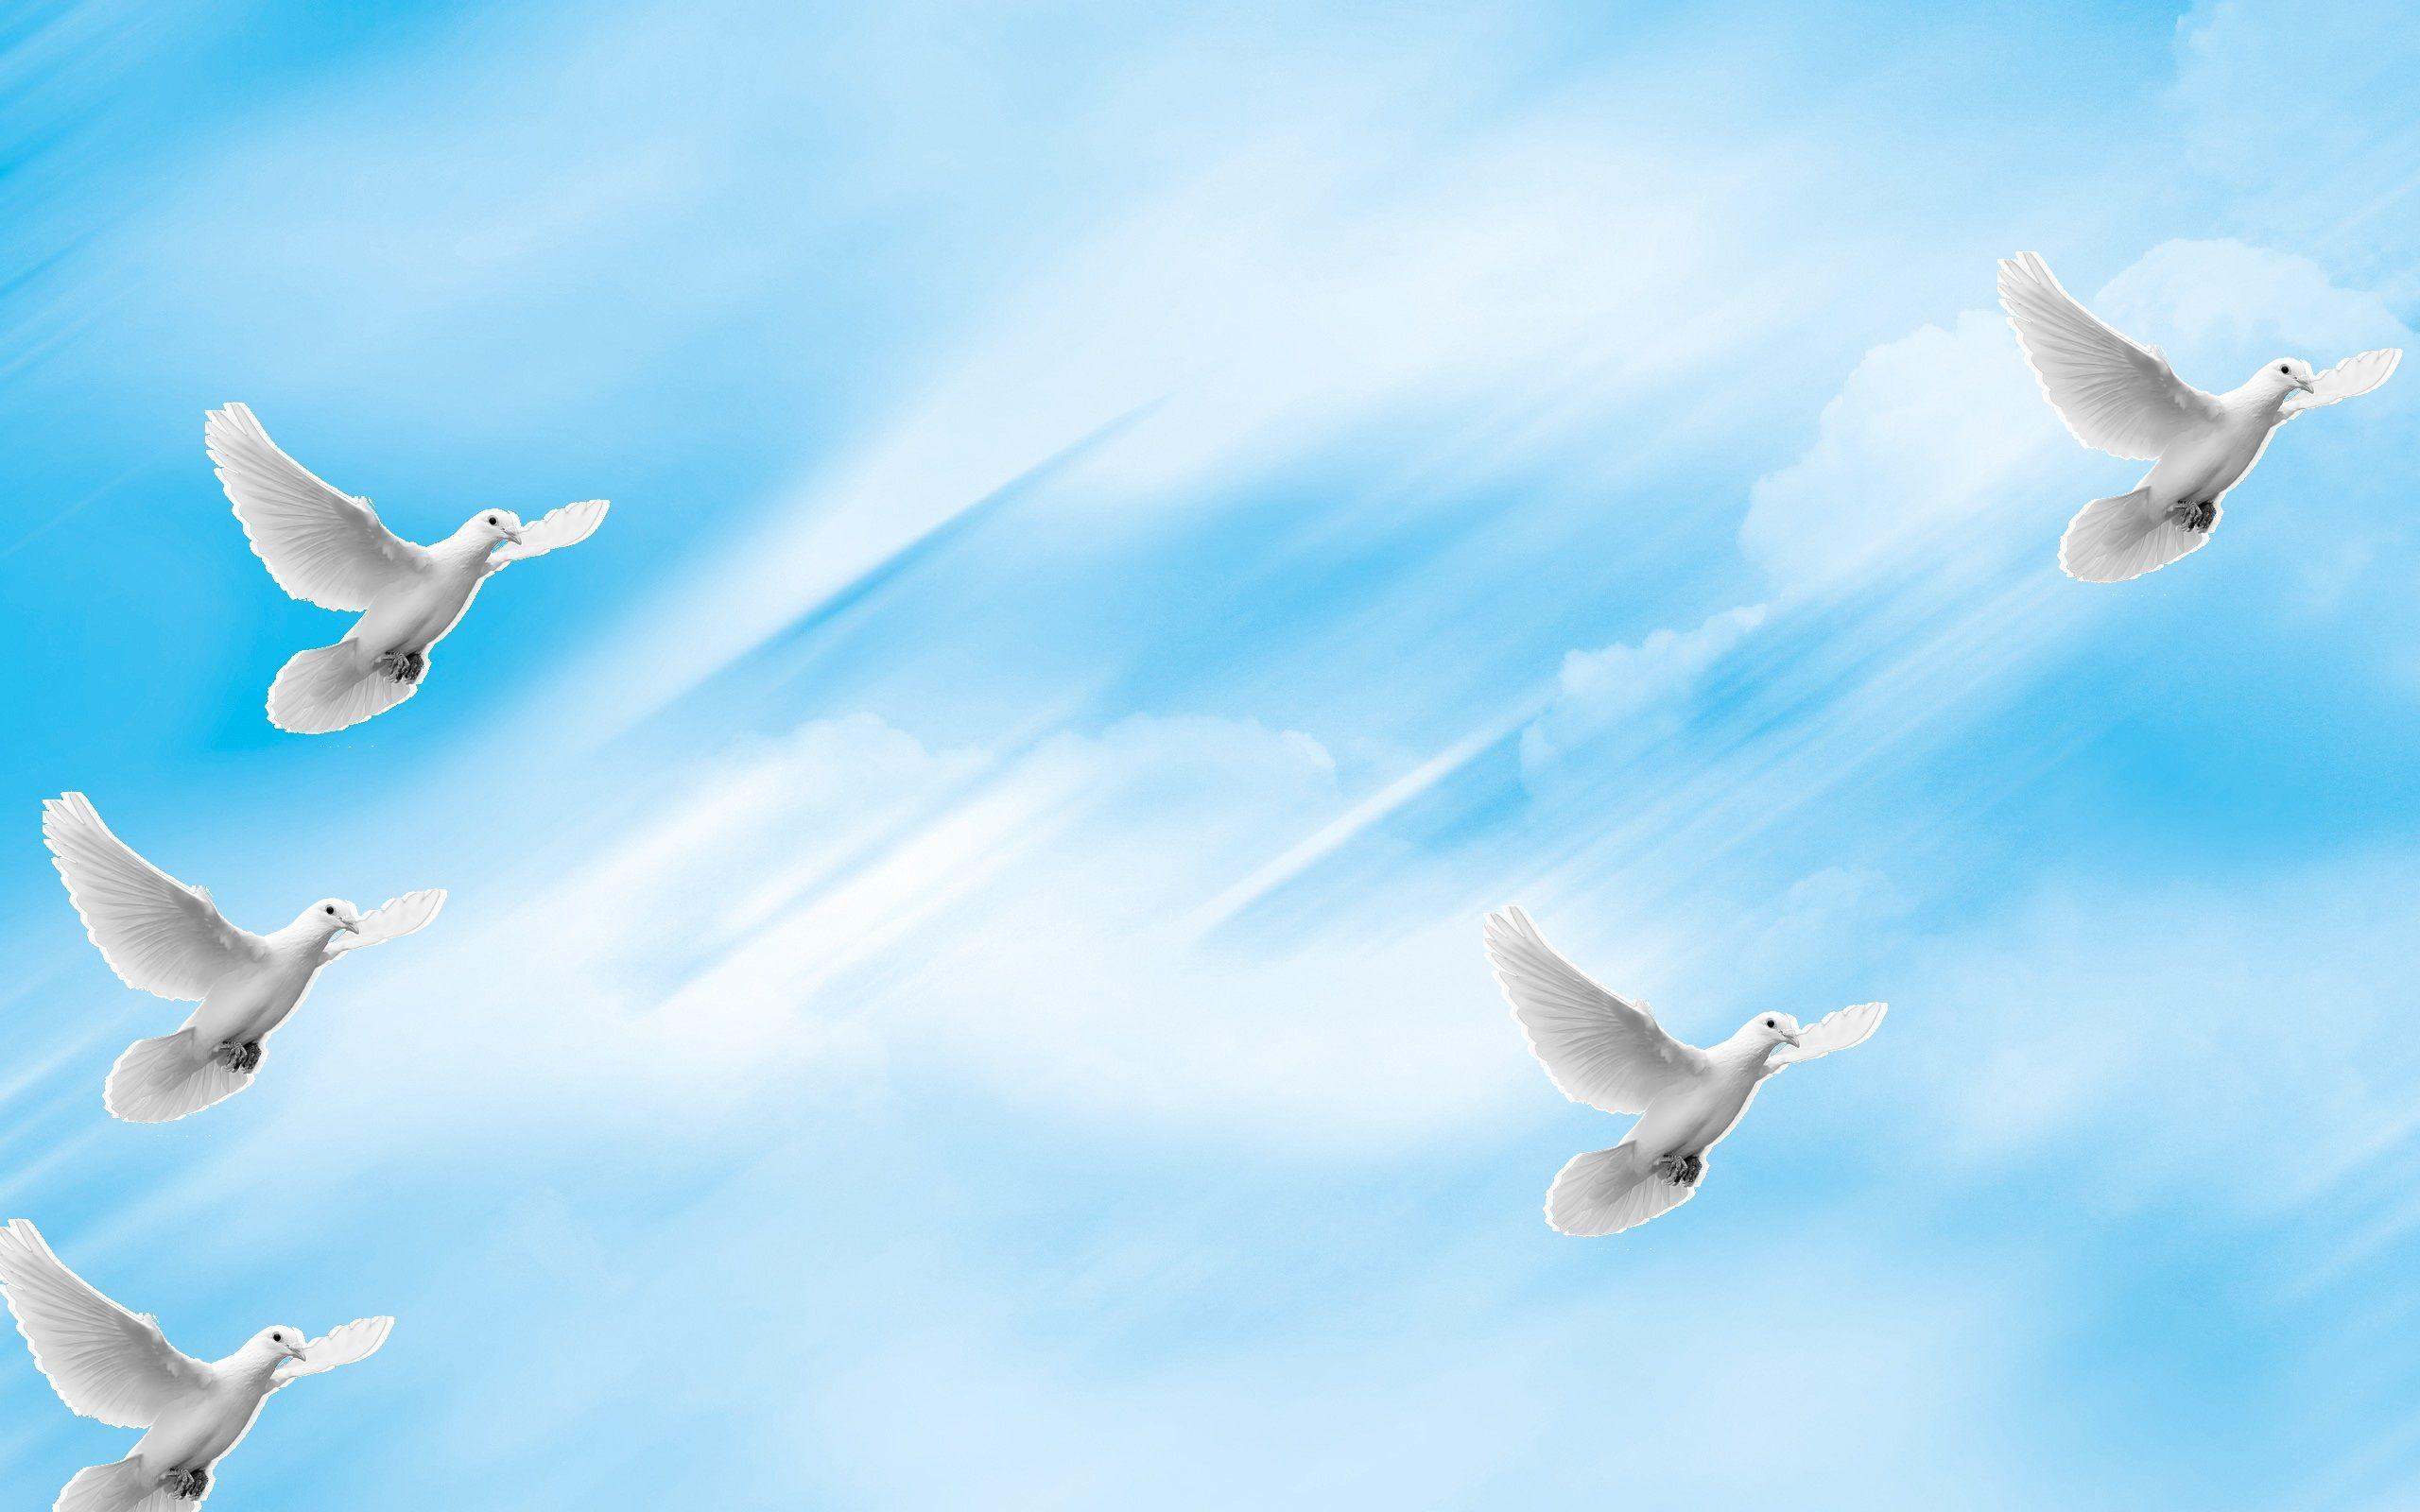 heavenly dove background 8. Background Check All